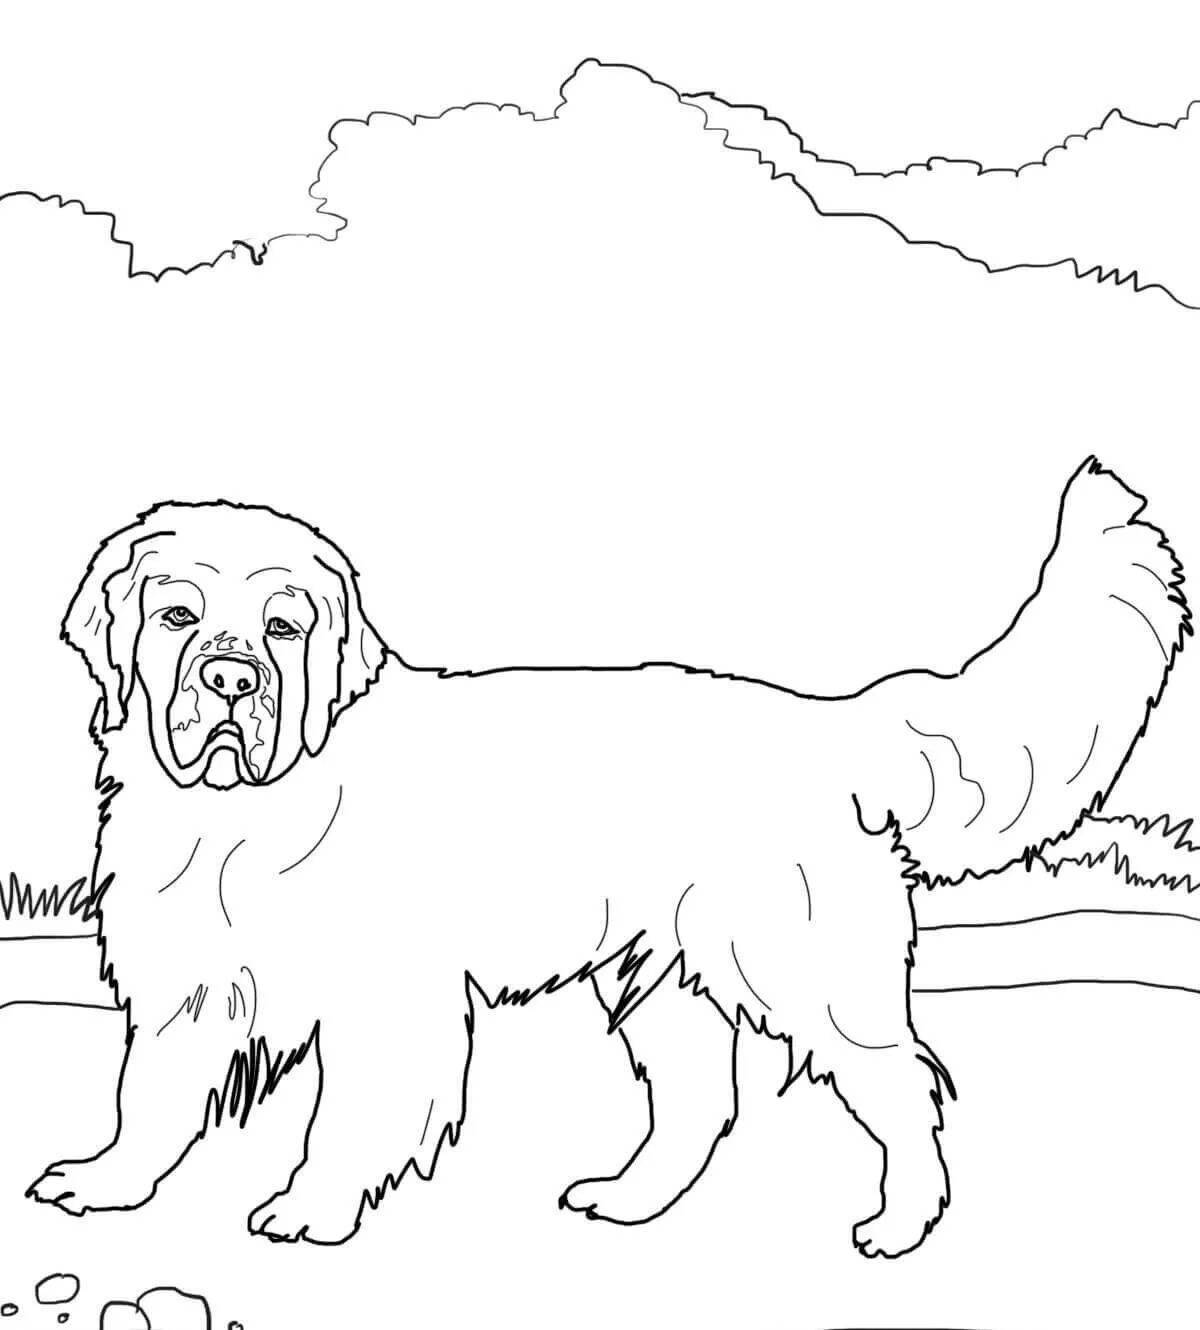 Fun working dog coloring pages for kids